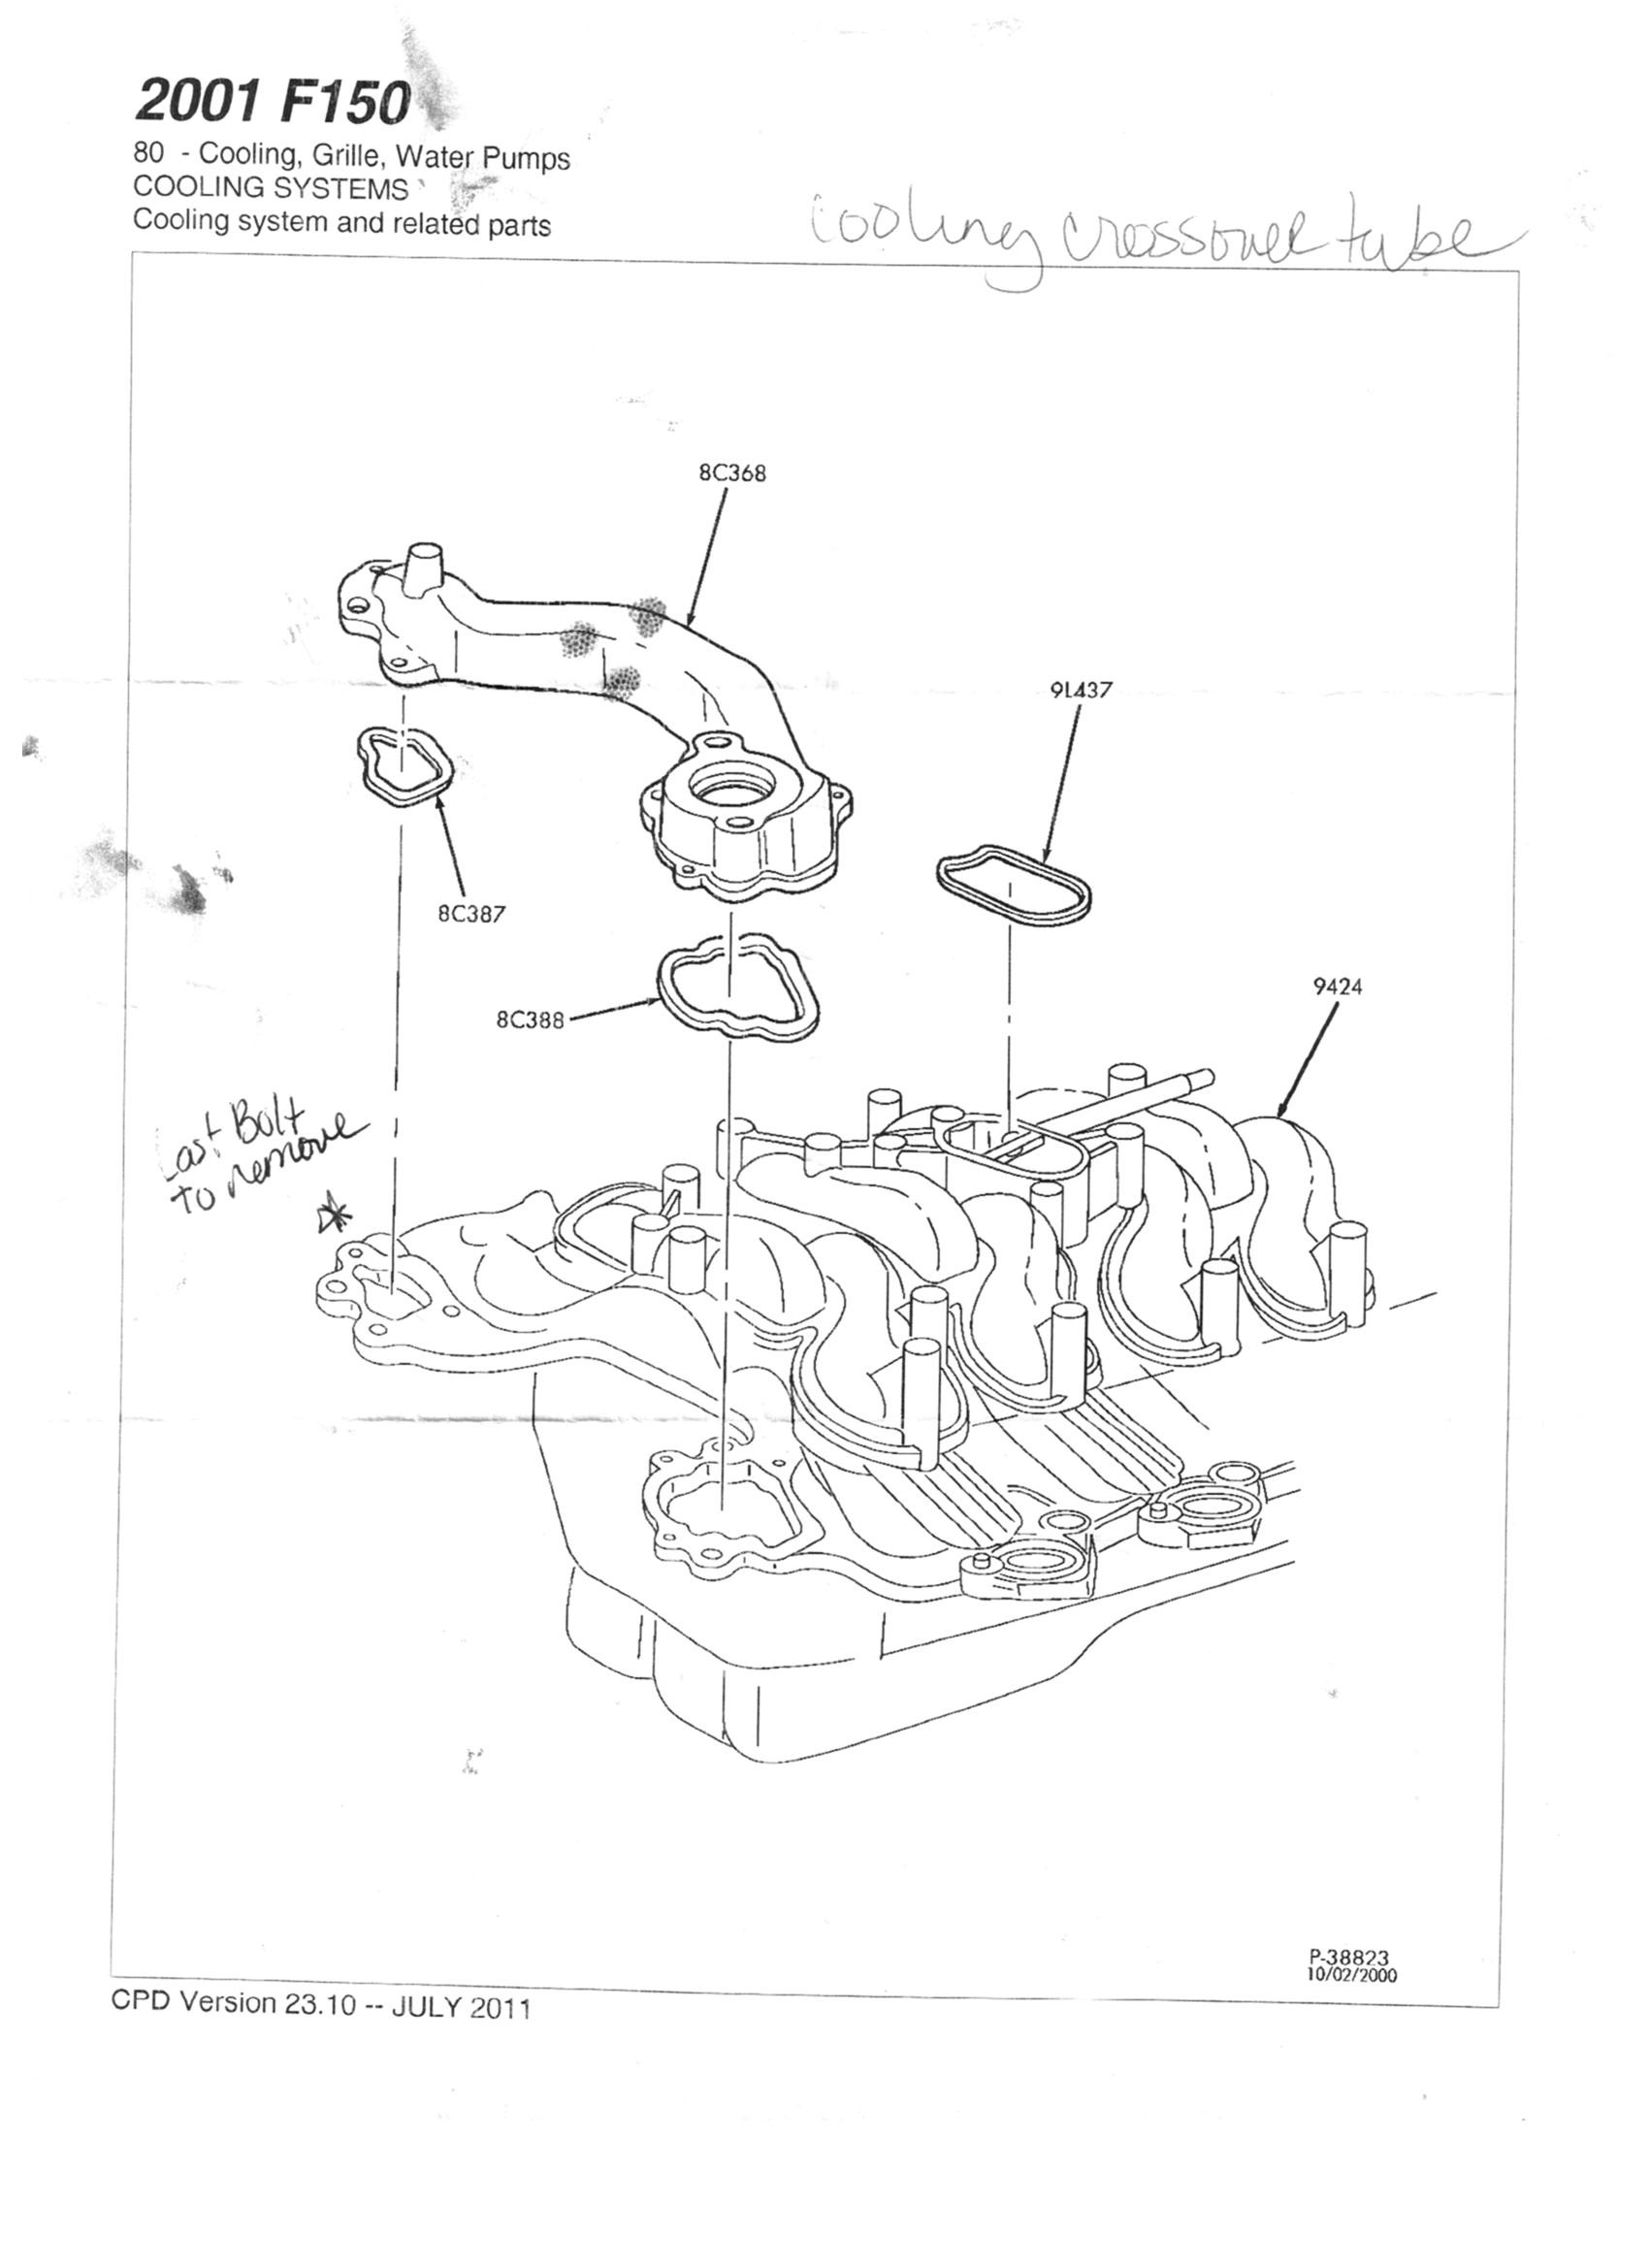 Water Cooled Engine Diagram 2001 ford 5 4 Engine Diagram Wiring Diagram Paper Of Water Cooled Engine Diagram